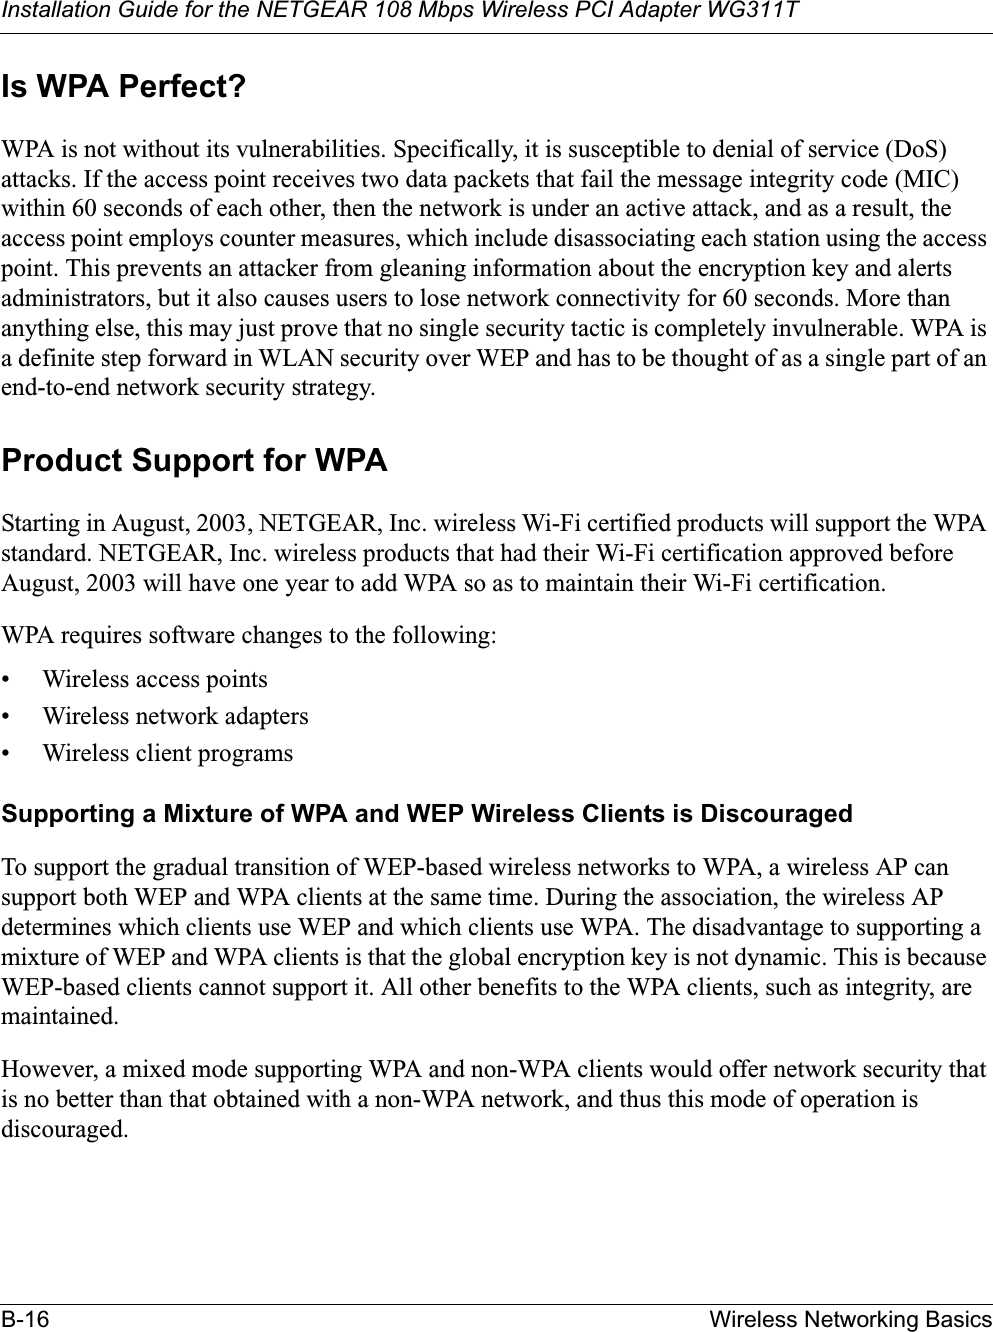 Installation Guide for the NETGEAR 108 Mbps Wireless PCI Adapter WG311TB-16 Wireless Networking BasicsIs WPA Perfect?WPA is not without its vulnerabilities. Specifically, it is susceptible to denial of service (DoS) attacks. If the access point receives two data packets that fail the message integrity code (MIC) within 60 seconds of each other, then the network is under an active attack, and as a result, the access point employs counter measures, which include disassociating each station using the access point. This prevents an attacker from gleaning information about the encryption key and alerts administrators, but it also causes users to lose network connectivity for 60 seconds. More than anything else, this may just prove that no single security tactic is completely invulnerable. WPA is a definite step forward in WLAN security over WEP and has to be thought of as a single part of an end-to-end network security strategy.Product Support for WPAStarting in August, 2003, NETGEAR, Inc. wireless Wi-Fi certified products will support the WPA standard. NETGEAR, Inc. wireless products that had their Wi-Fi certification approved before August, 2003 will have one year to add WPA so as to maintain their Wi-Fi certification.WPA requires software changes to the following: • Wireless access points • Wireless network adapters • Wireless client programsSupporting a Mixture of WPA and WEP Wireless Clients is DiscouragedTo support the gradual transition of WEP-based wireless networks to WPA, a wireless AP can support both WEP and WPA clients at the same time. During the association, the wireless AP determines which clients use WEP and which clients use WPA. The disadvantage to supporting a mixture of WEP and WPA clients is that the global encryption key is not dynamic. This is because WEP-based clients cannot support it. All other benefits to the WPA clients, such as integrity, are maintained.However, a mixed mode supporting WPA and non-WPA clients would offer network security that is no better than that obtained with a non-WPA network, and thus this mode of operation is discouraged.